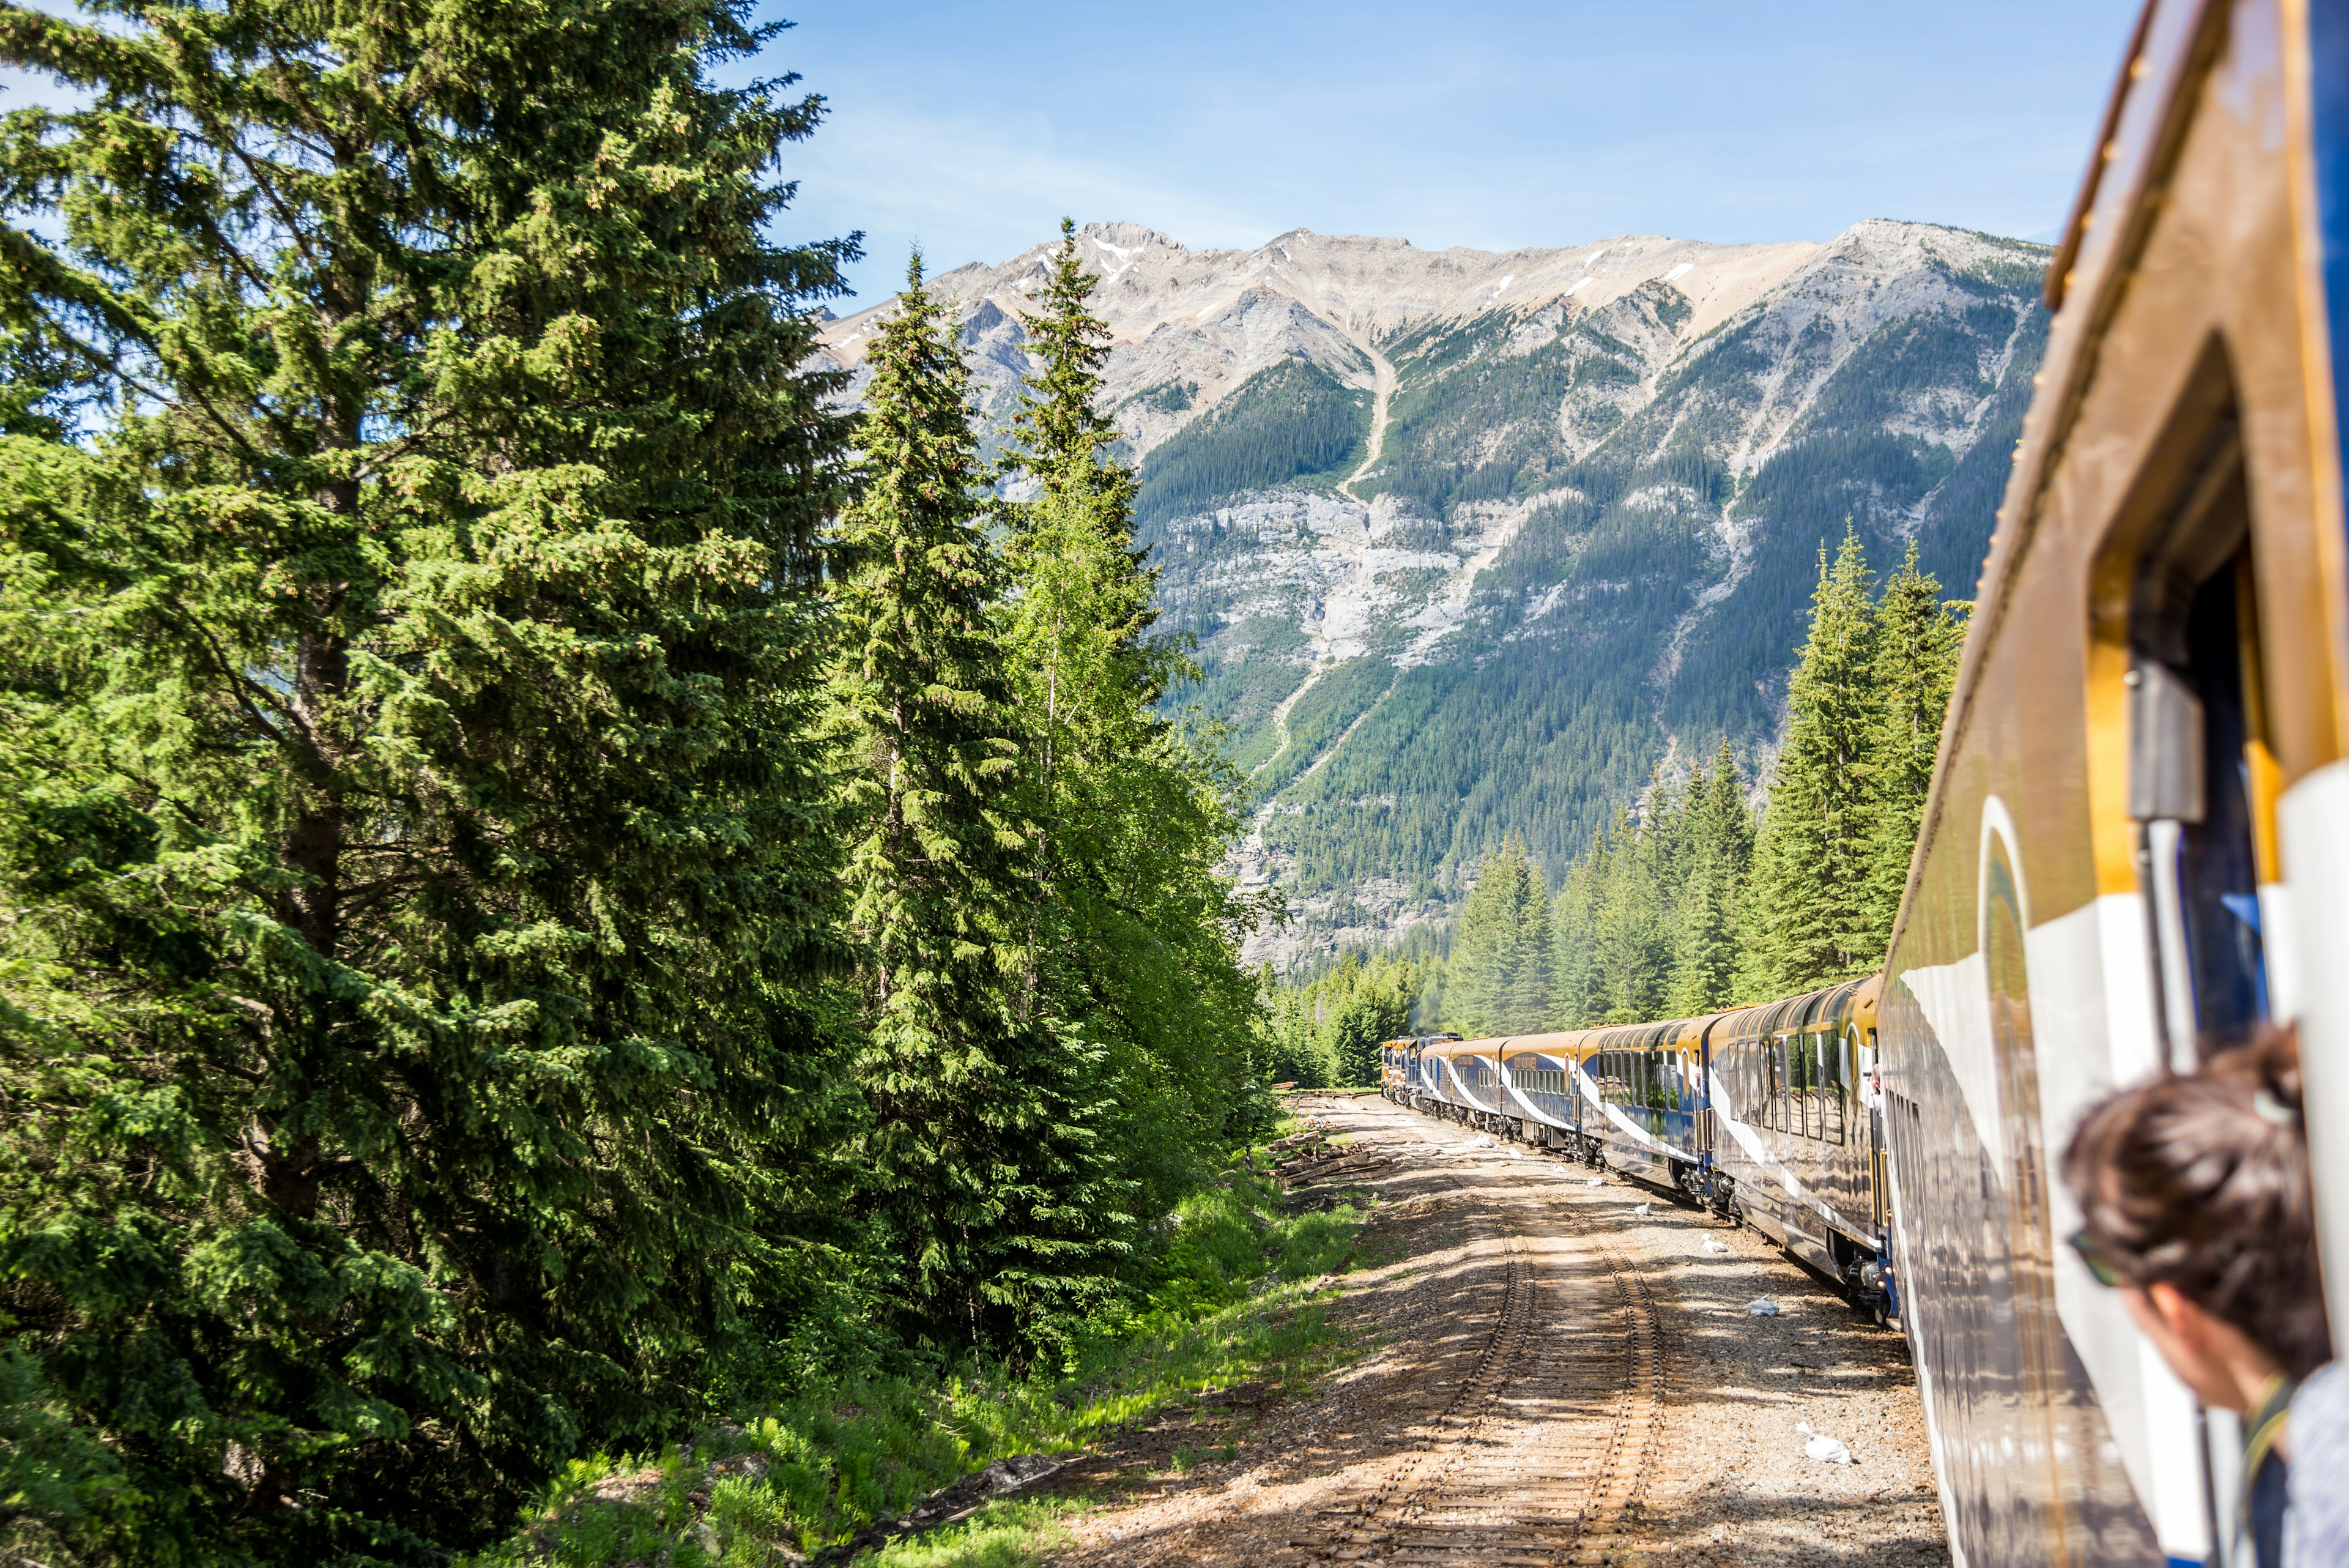 Vancouver, British Columbia / Canada - 06/17/2015 Rocky Mountaineer train traveling through the Rocky Mountains with luxury dining on board.